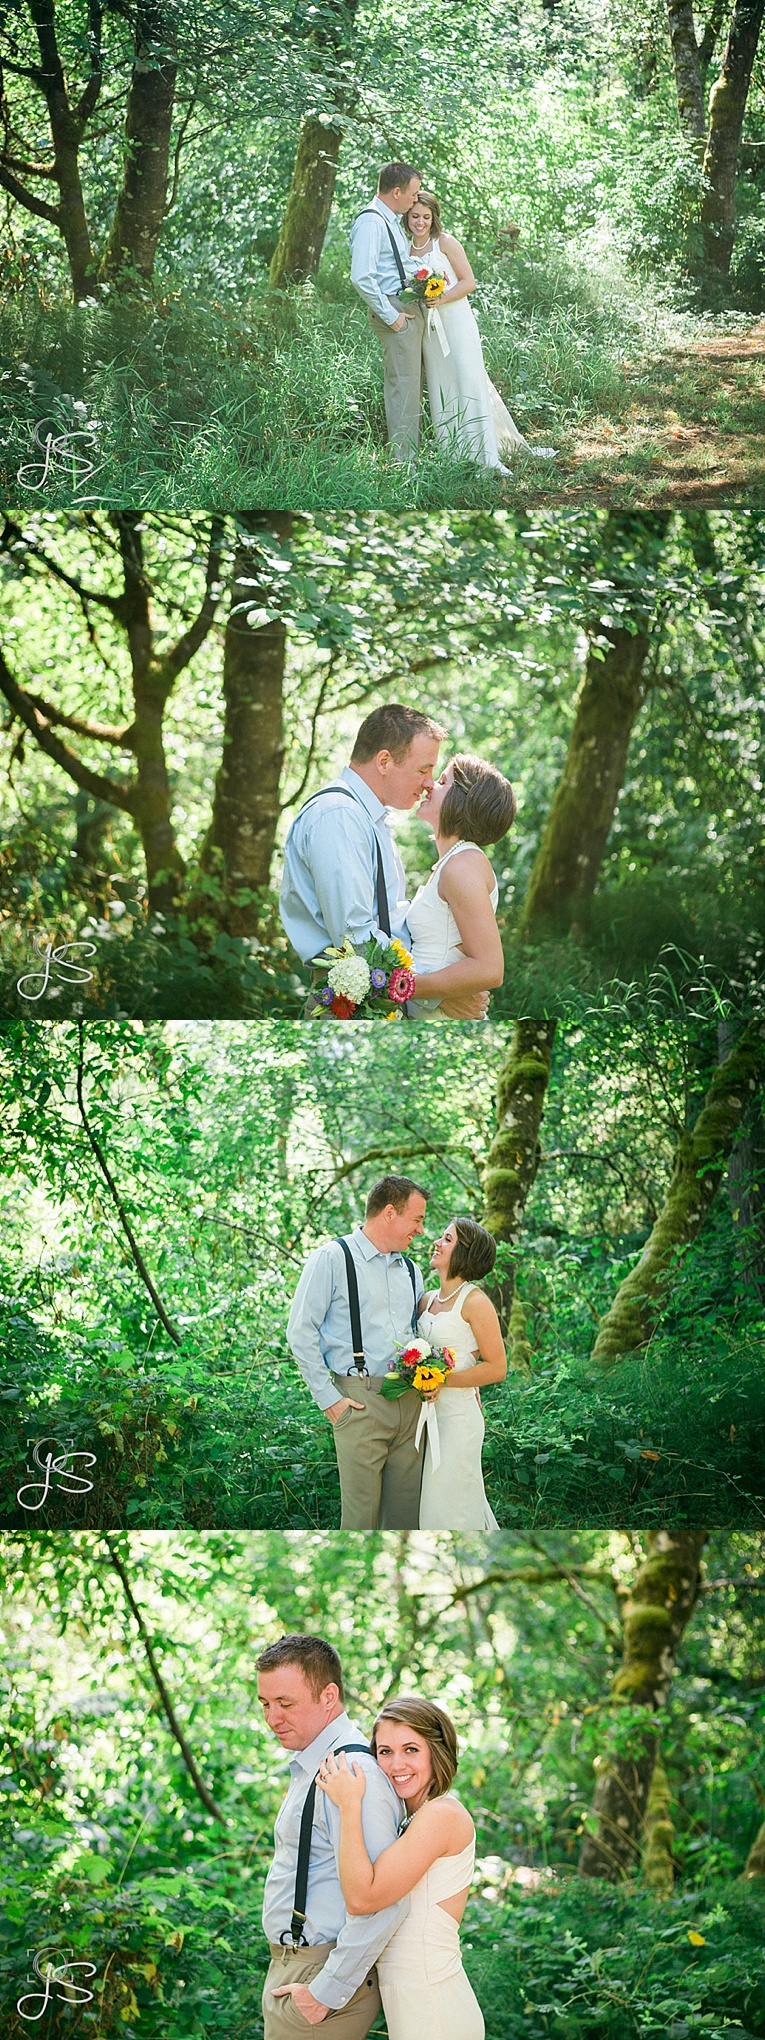 Sherman Valley Ranch wedding photos by Jenny Storment Photography a Tacoma Based wedding photographer-10